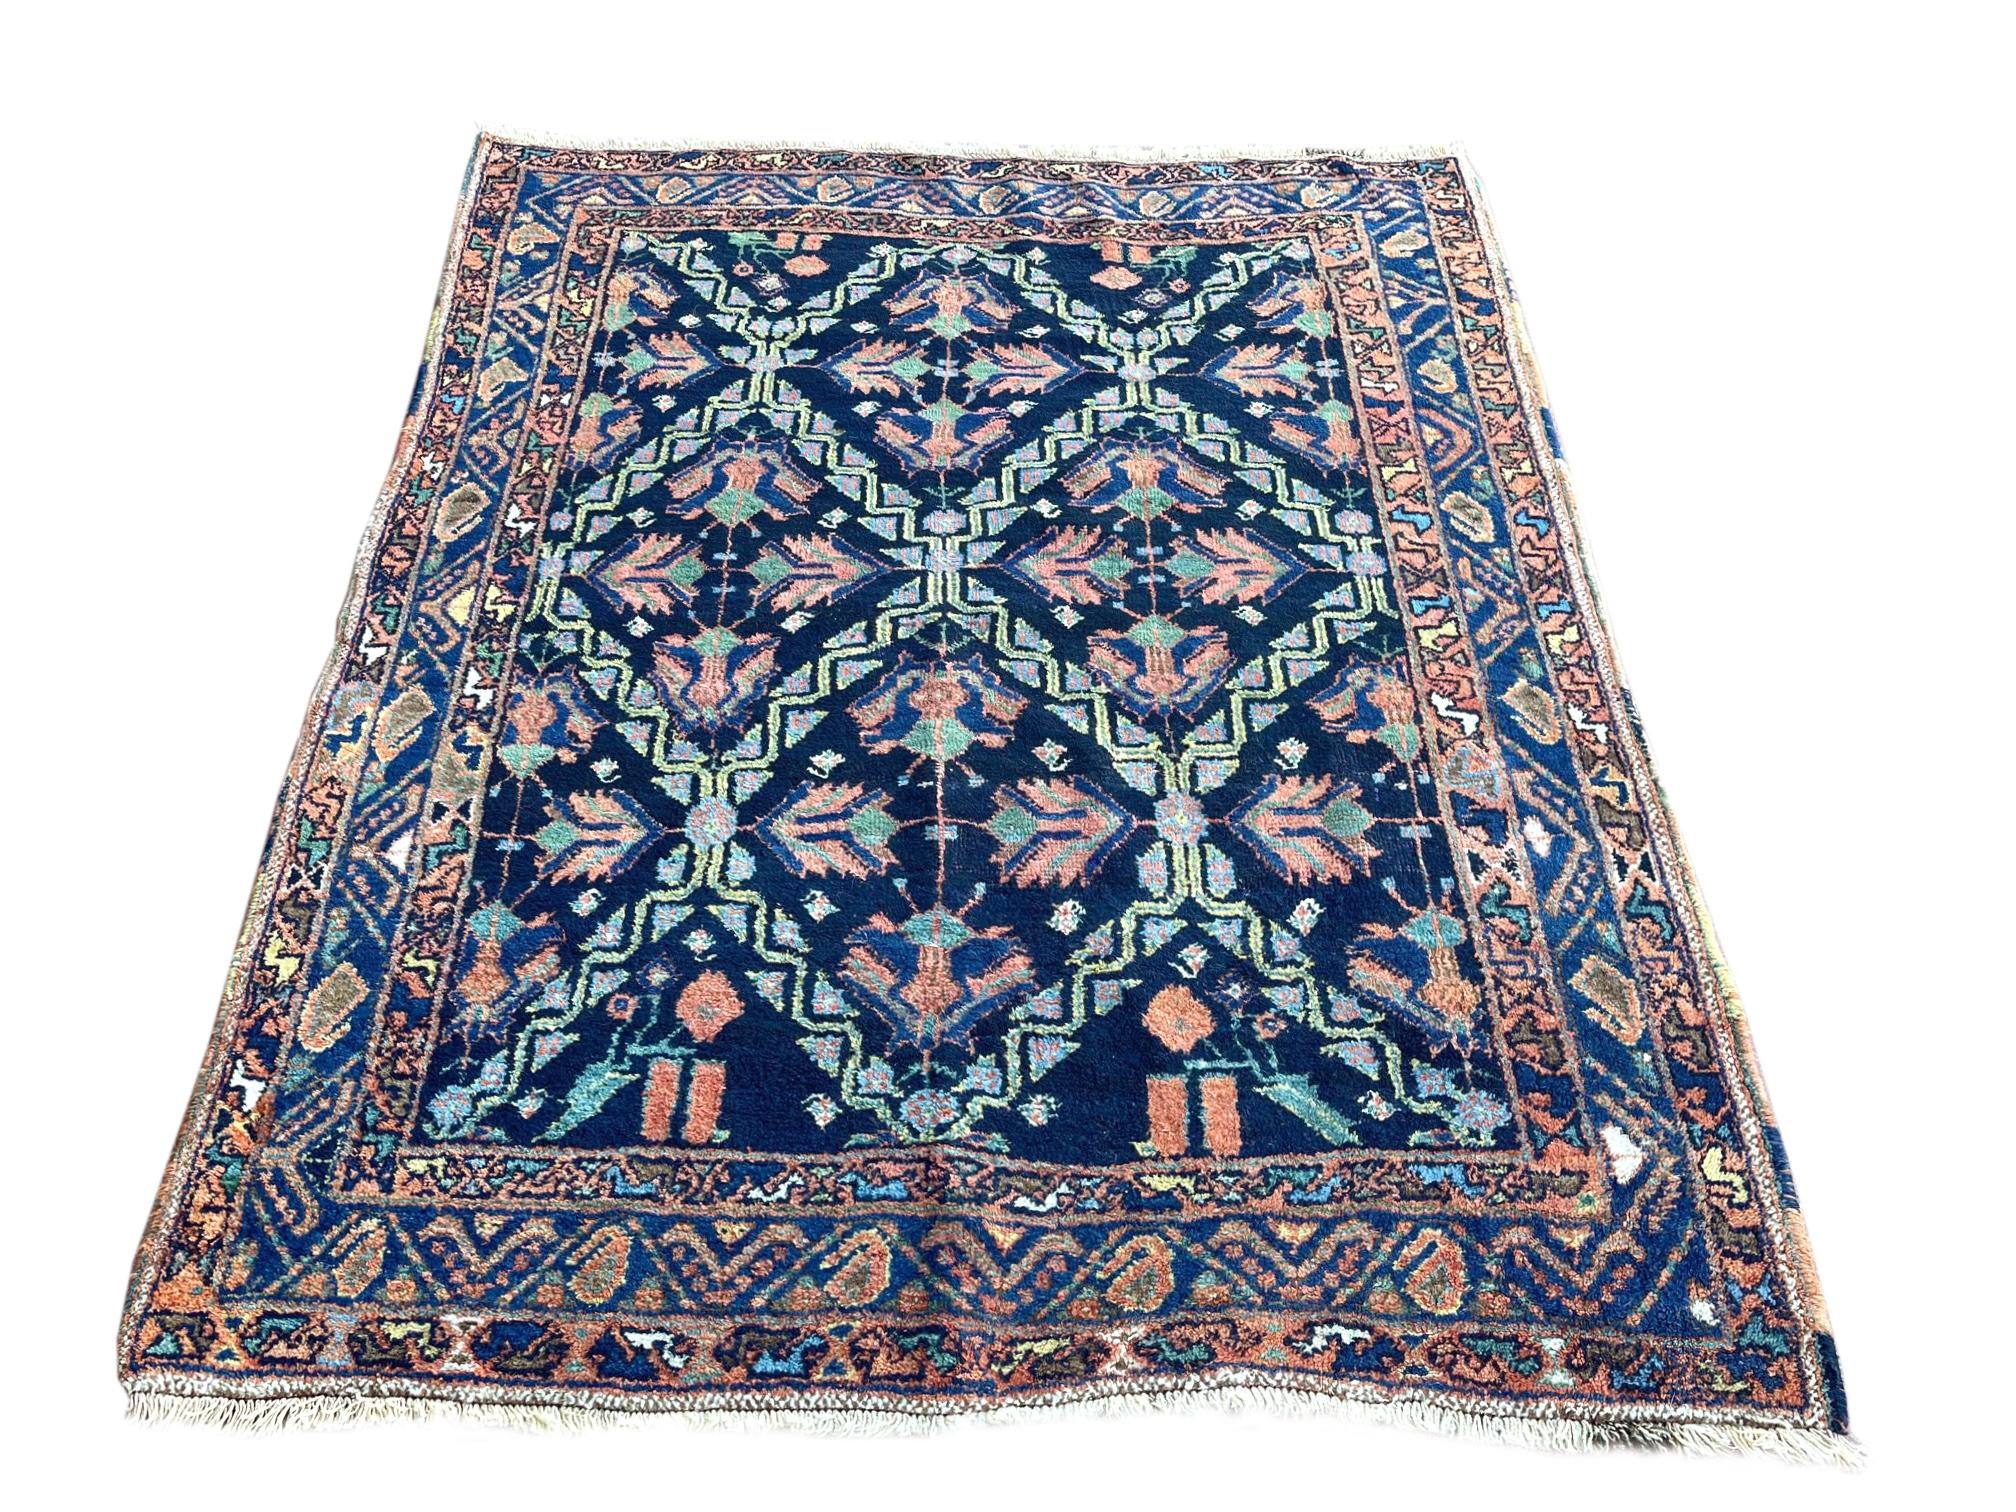 This stunning piece is from Northwest in Iran. Northwest refers to a diverse group of antique Persian rugs from west of Tehran, north of Bijar and south of Tabriz. The colors in this rug are dominated by different nuances of indigo blue, salmon,